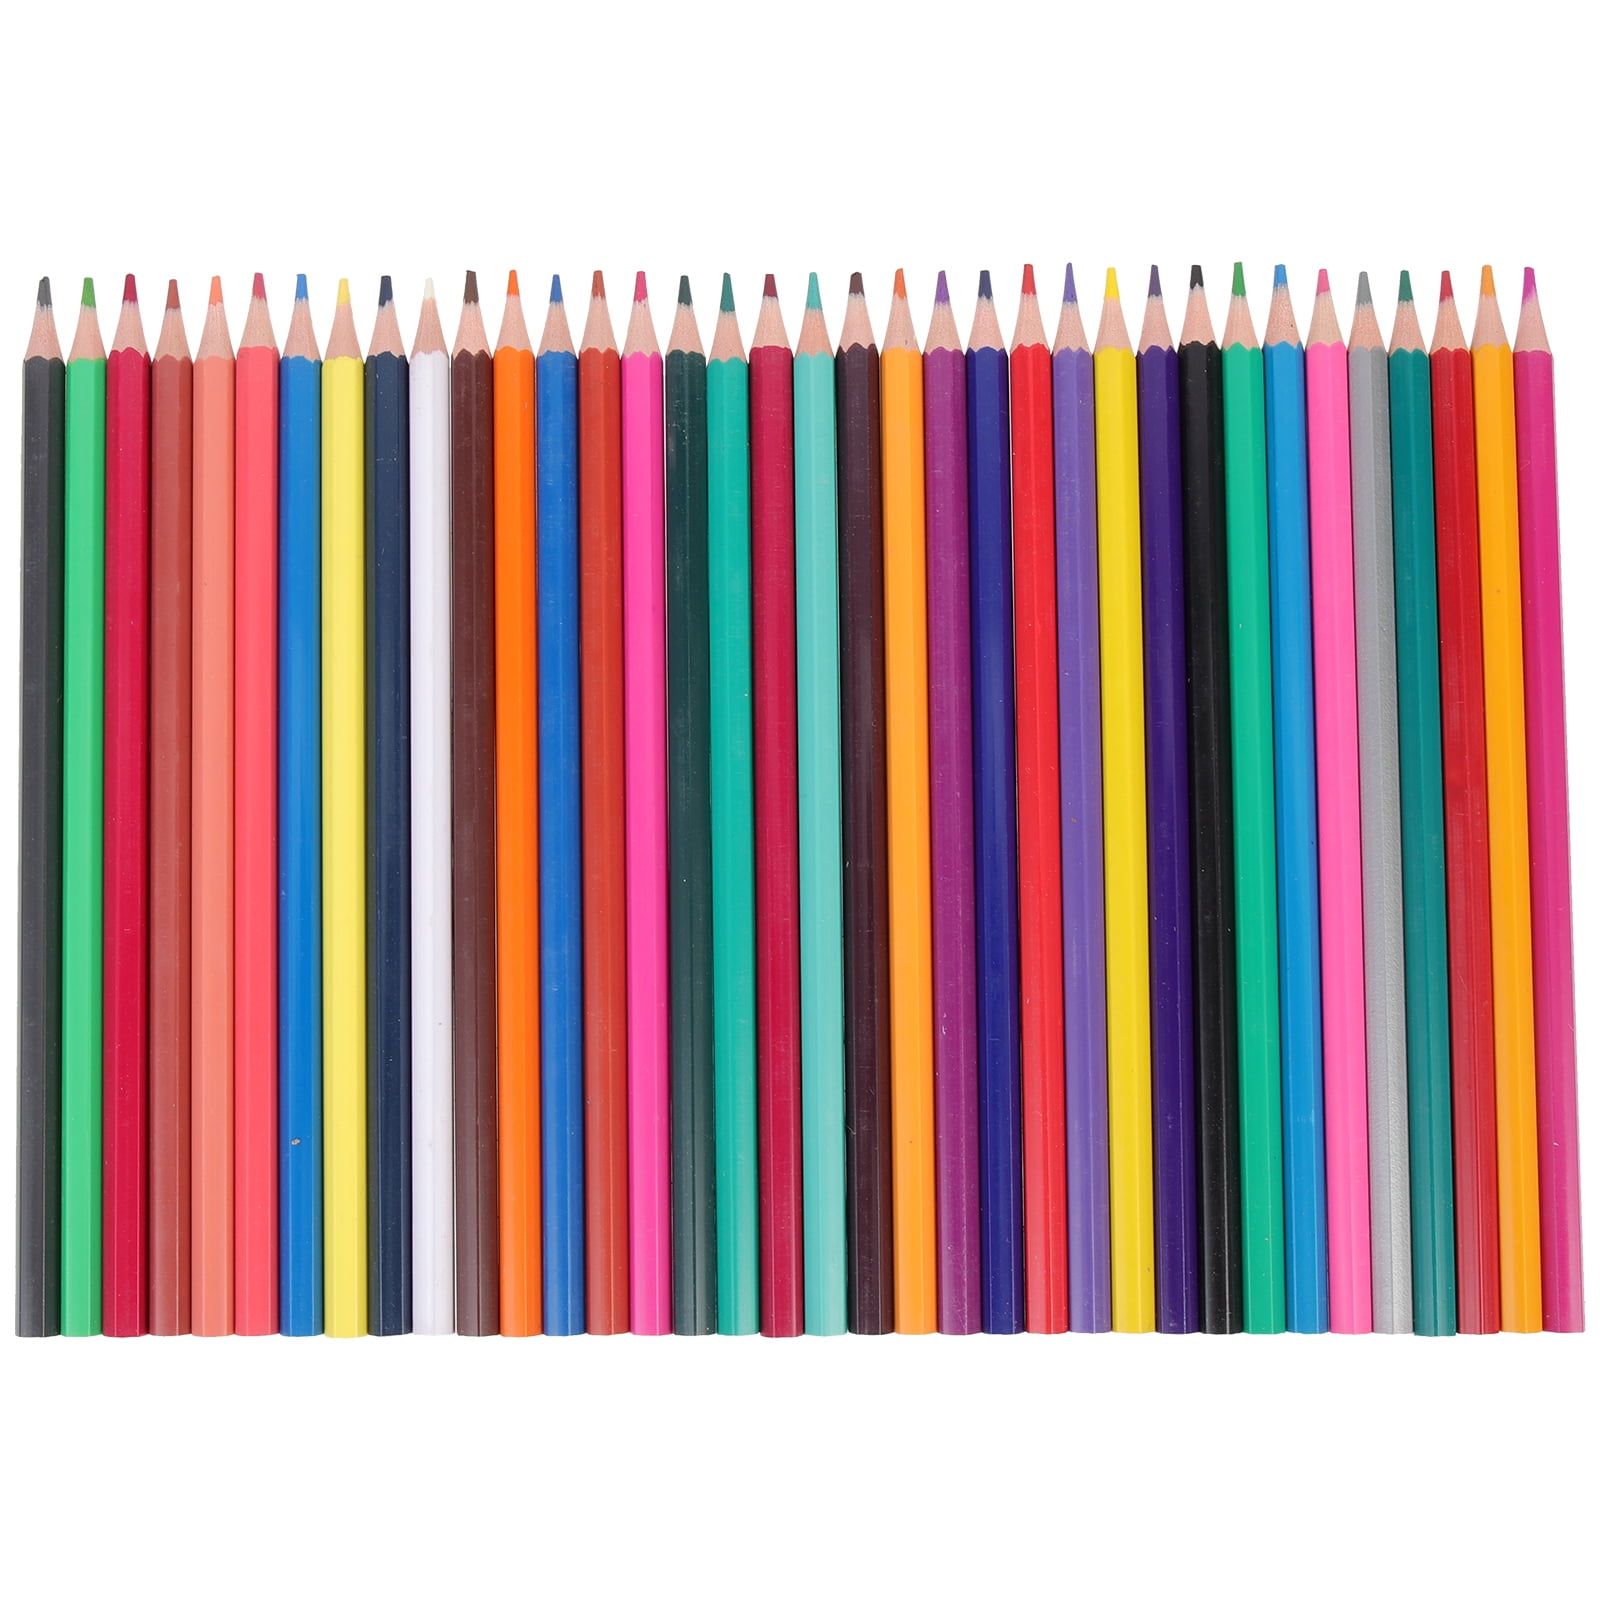 72 Colored Pencils Set,Artist Color Pencil Kit for Adult Kids Teens Coloring  DrawingSoft Core,Oil Based Coloured Pencil,Coloring  Book,Sketchpad,Sharpener in Pencil Case 